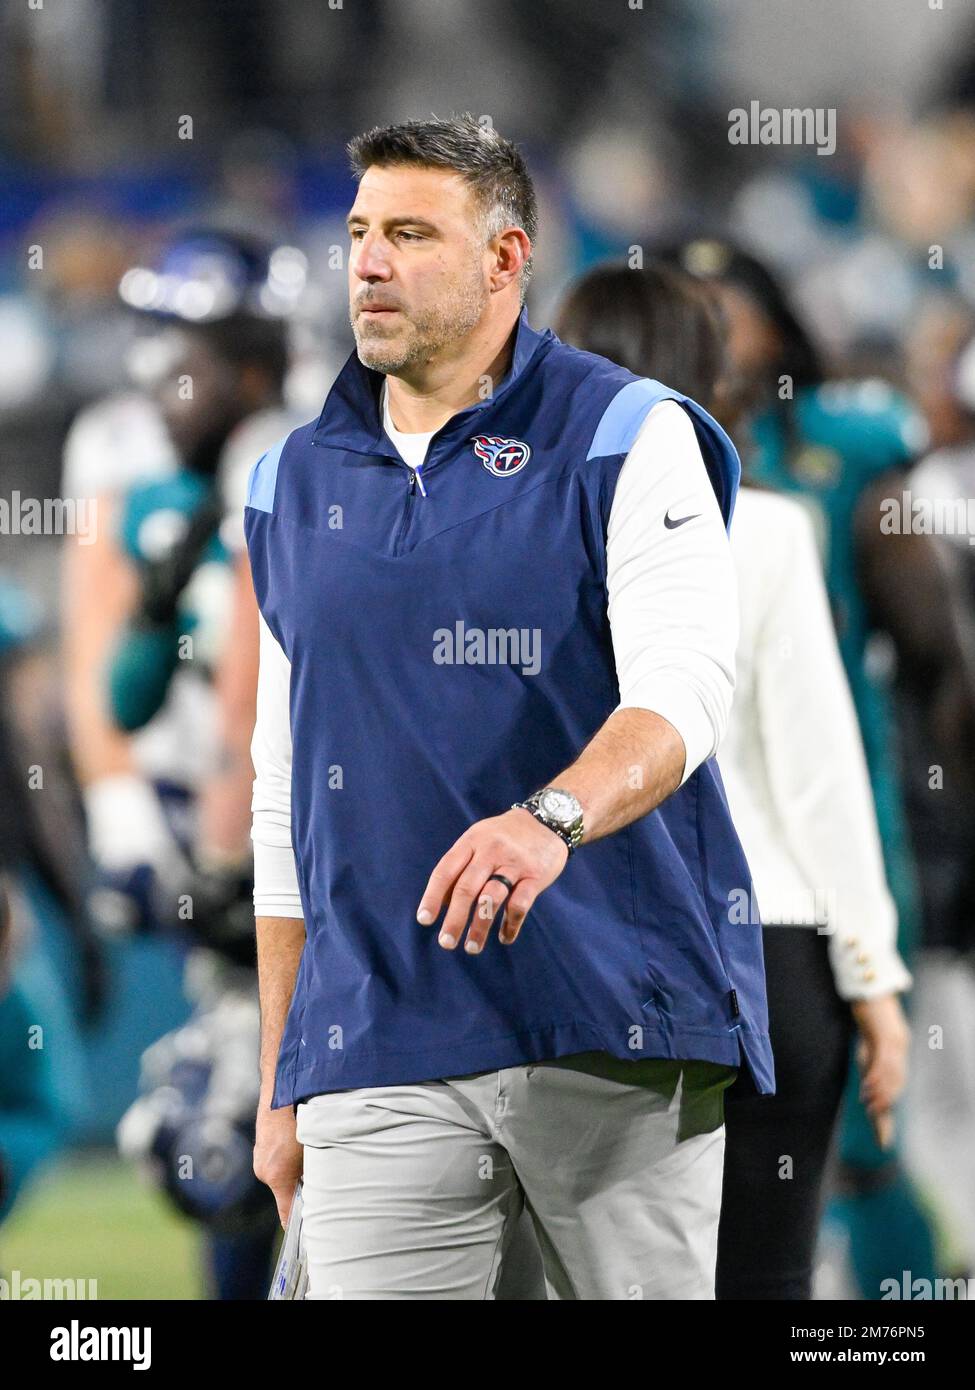 Jacksonville, FL, USA. 7th Jan, 2023. Tennessee Titans head coach Mike Vrabel walks of the field after the Jacksonville Jaguars defeated the Tennessee Titans 20-16 to win the AFC South Division in Jacksonville, FL. Romeo T Guzman/CSM/Alamy Live News Stock Photo